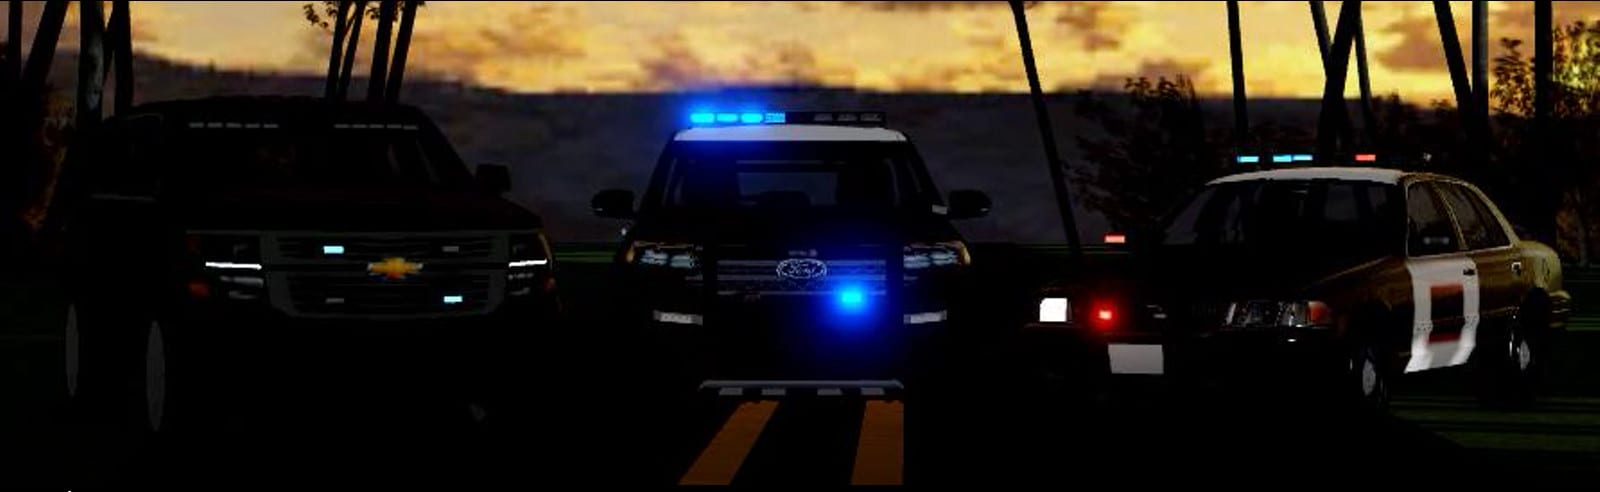 Build A Roblox Map Or Make A Cop Car For You By Sillyanimations - swat van vehicle roblox